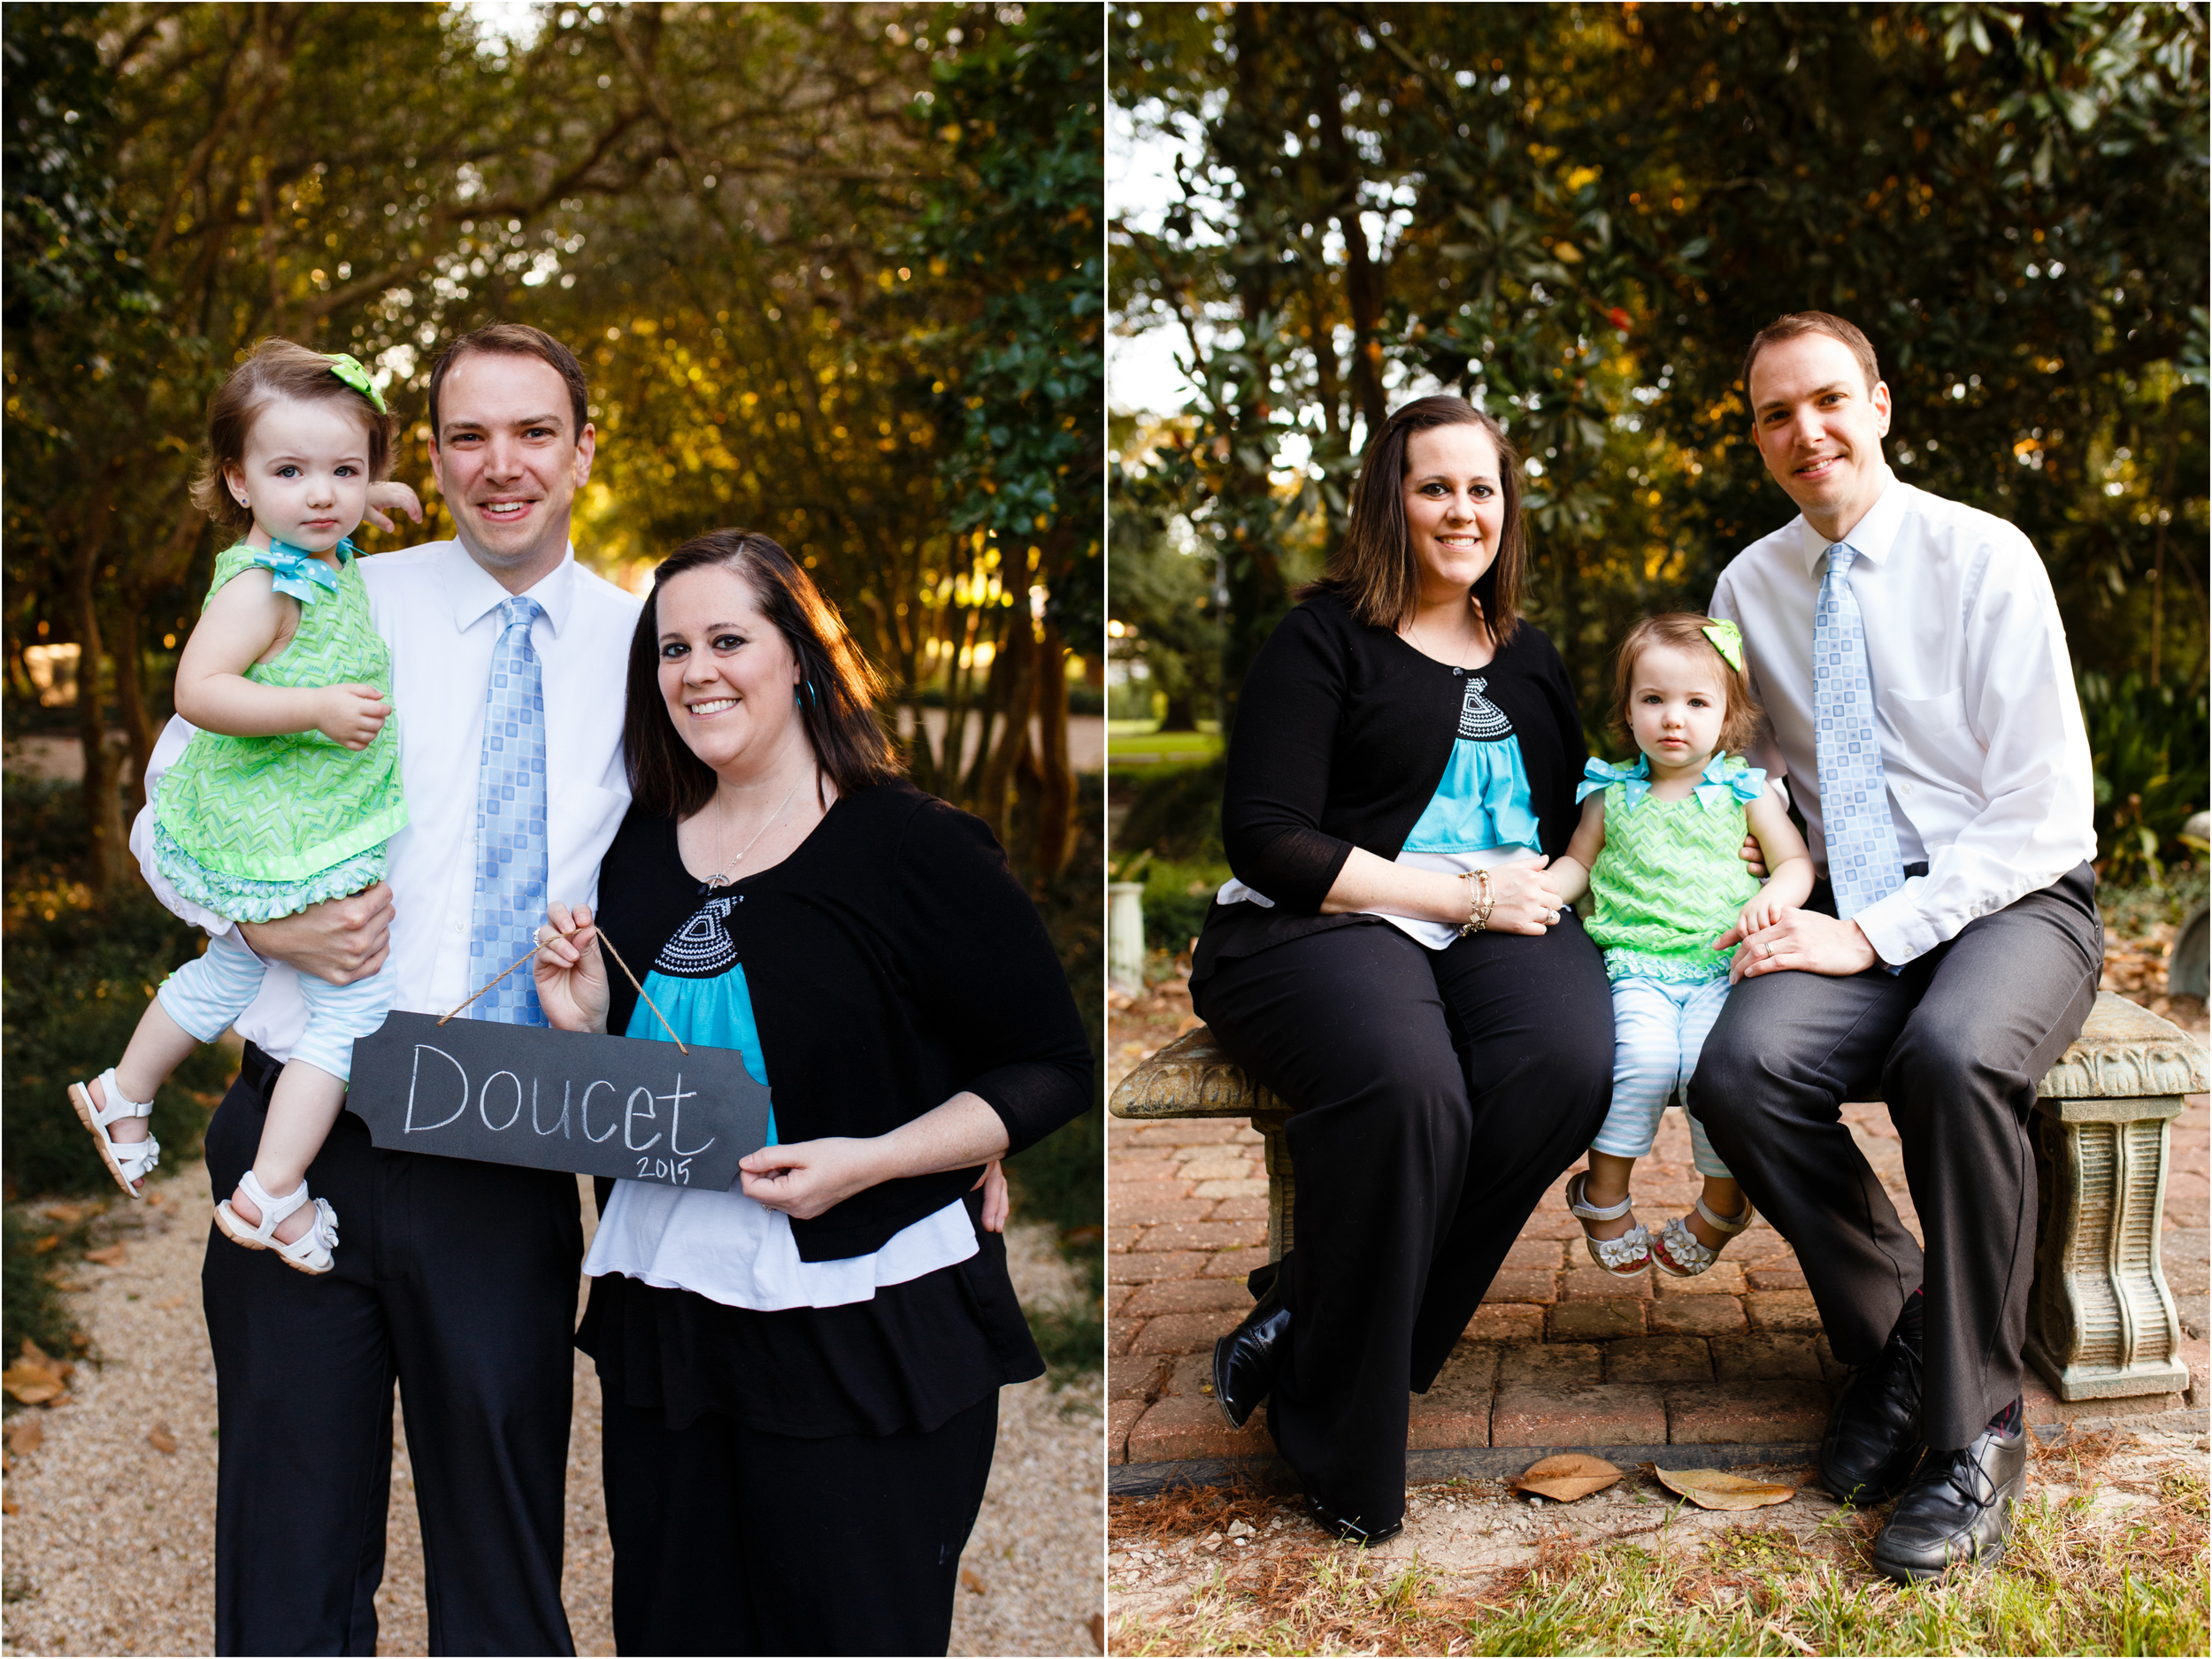 Family-portrait-lafayette-broussard-youngsville-photographer-diptych 8.jpg